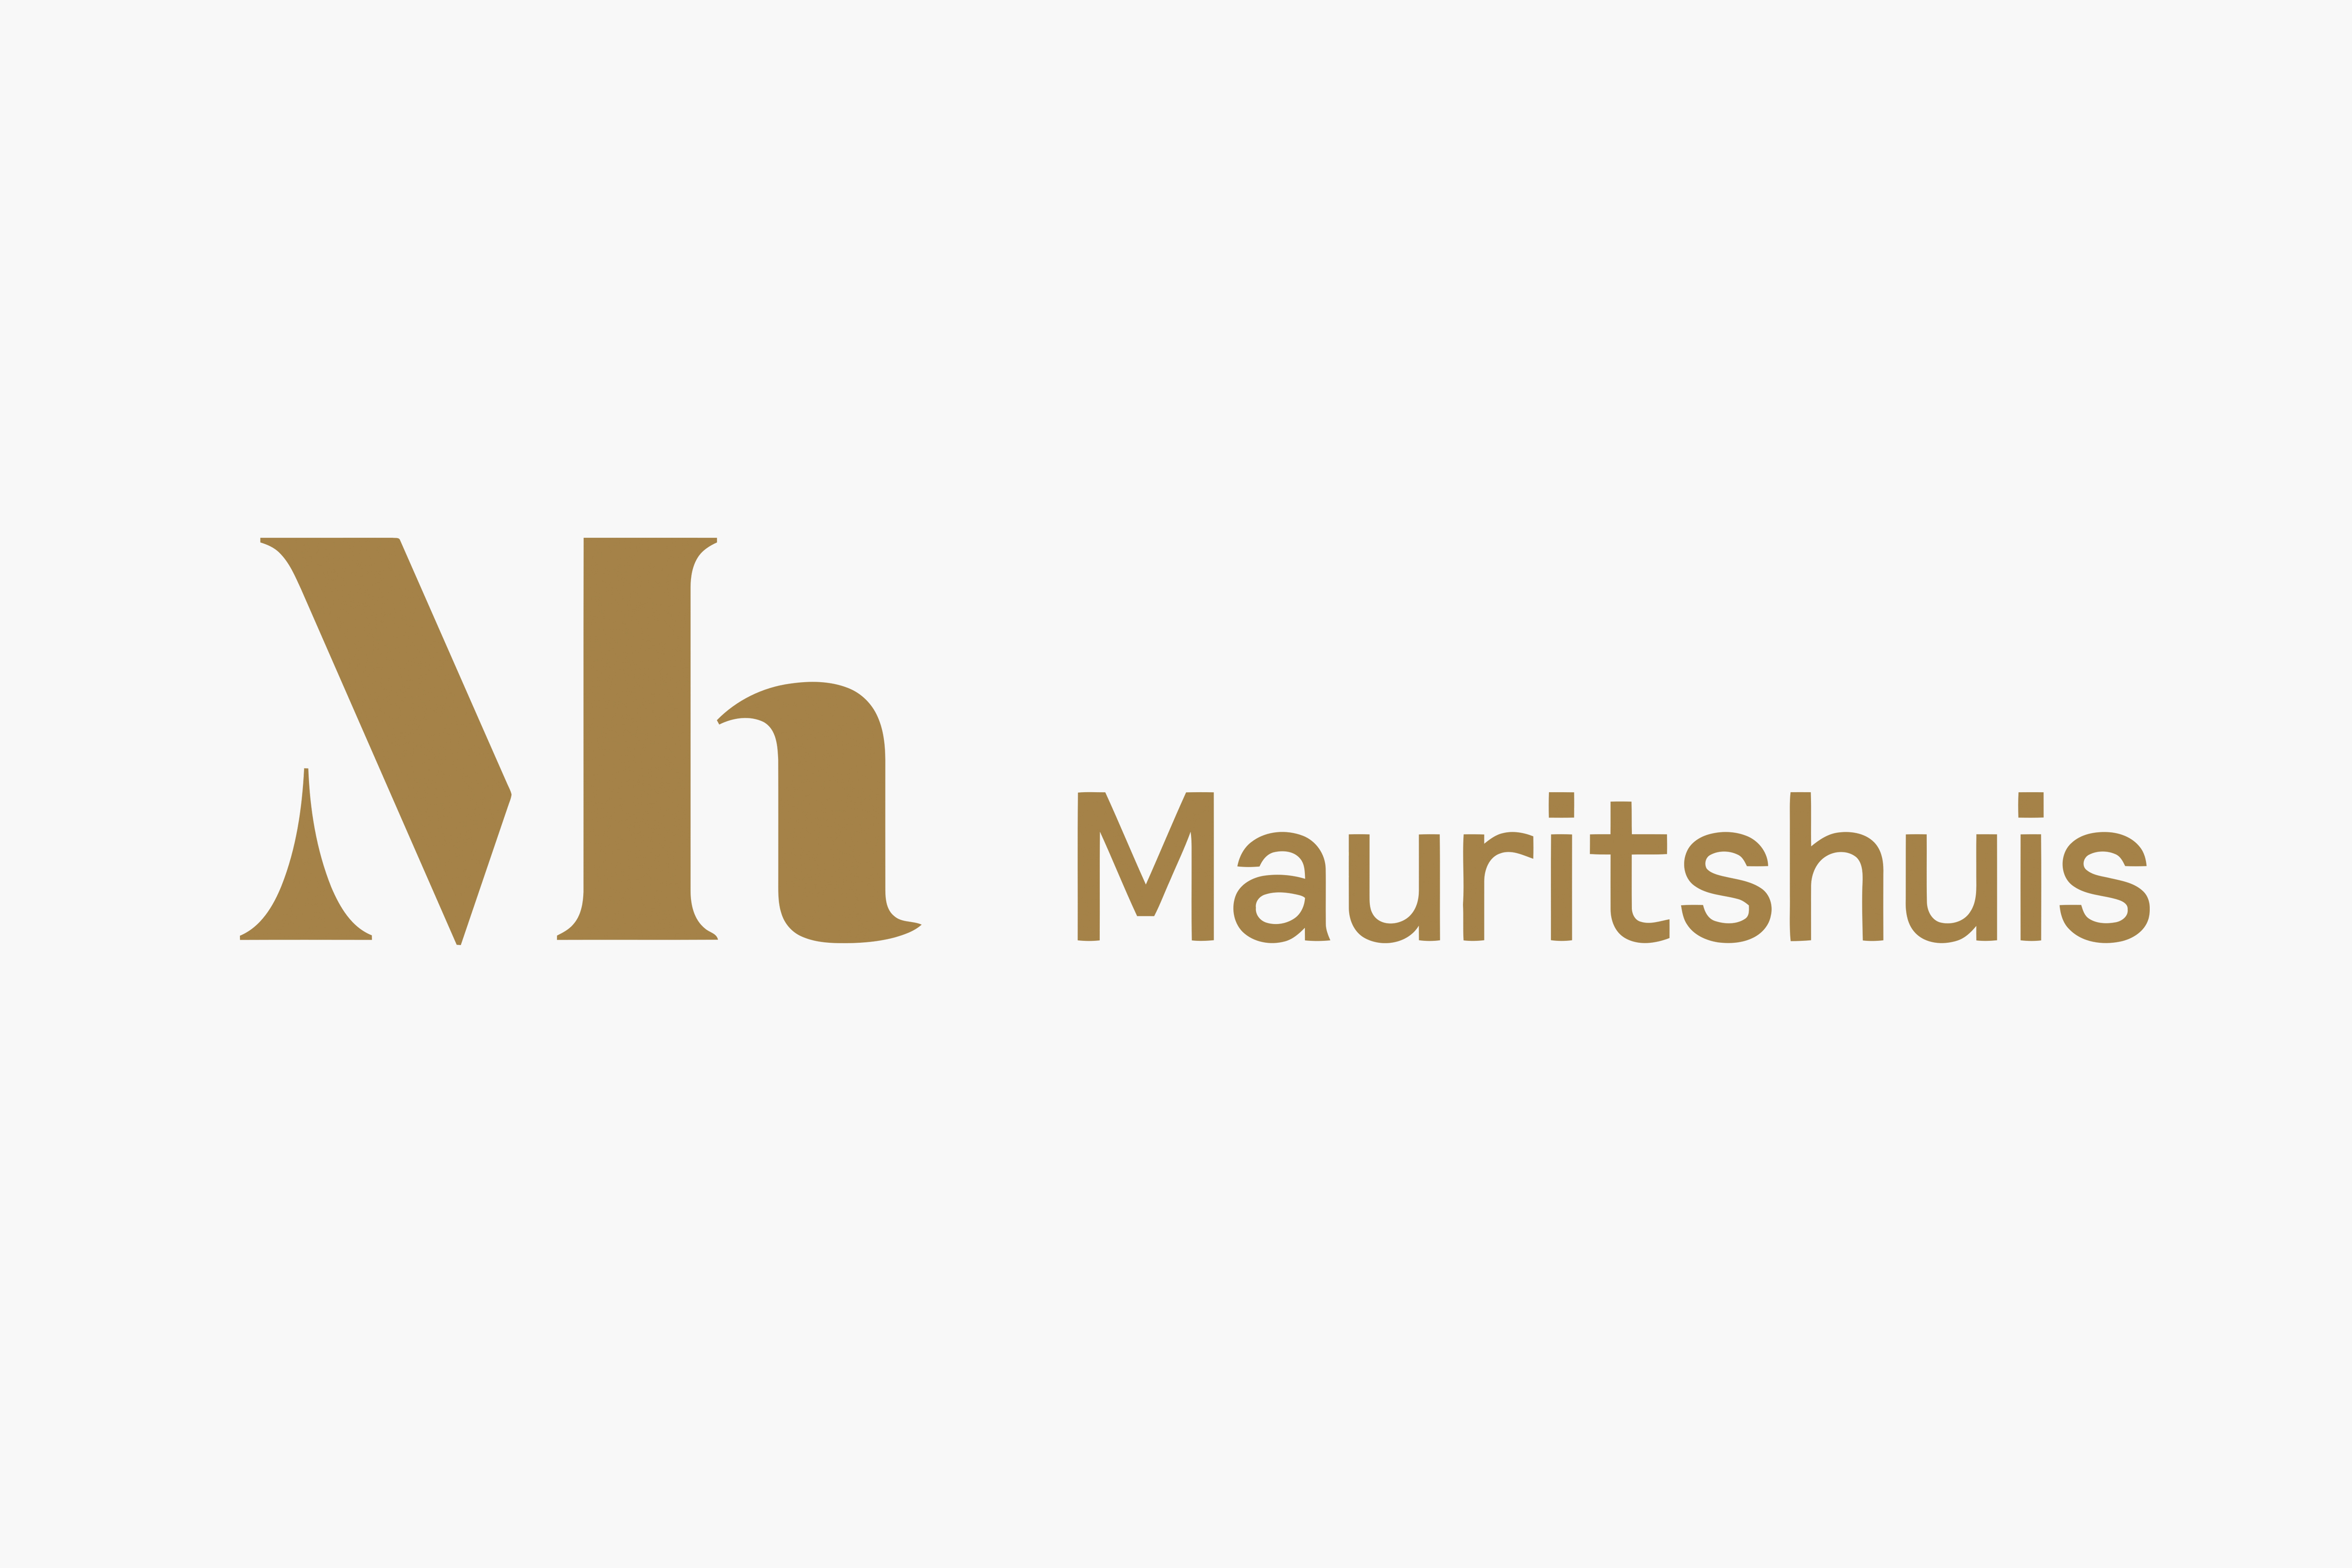 Monogram and logotype designed by Dumbar for art museum Mauritshuis